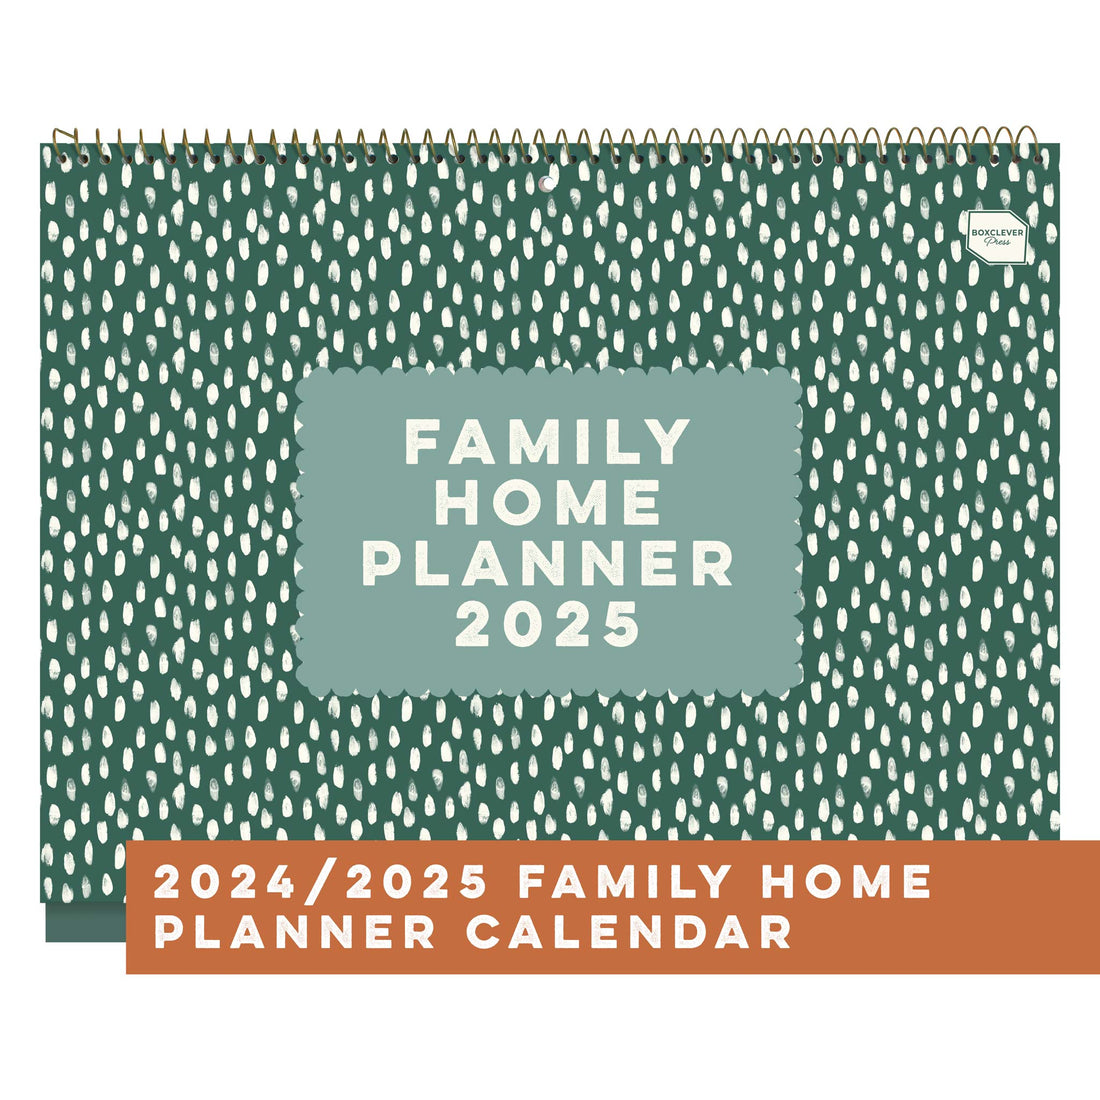 Boxclever Press Family Home Planner Calendar 2025 with a green cover and white dots